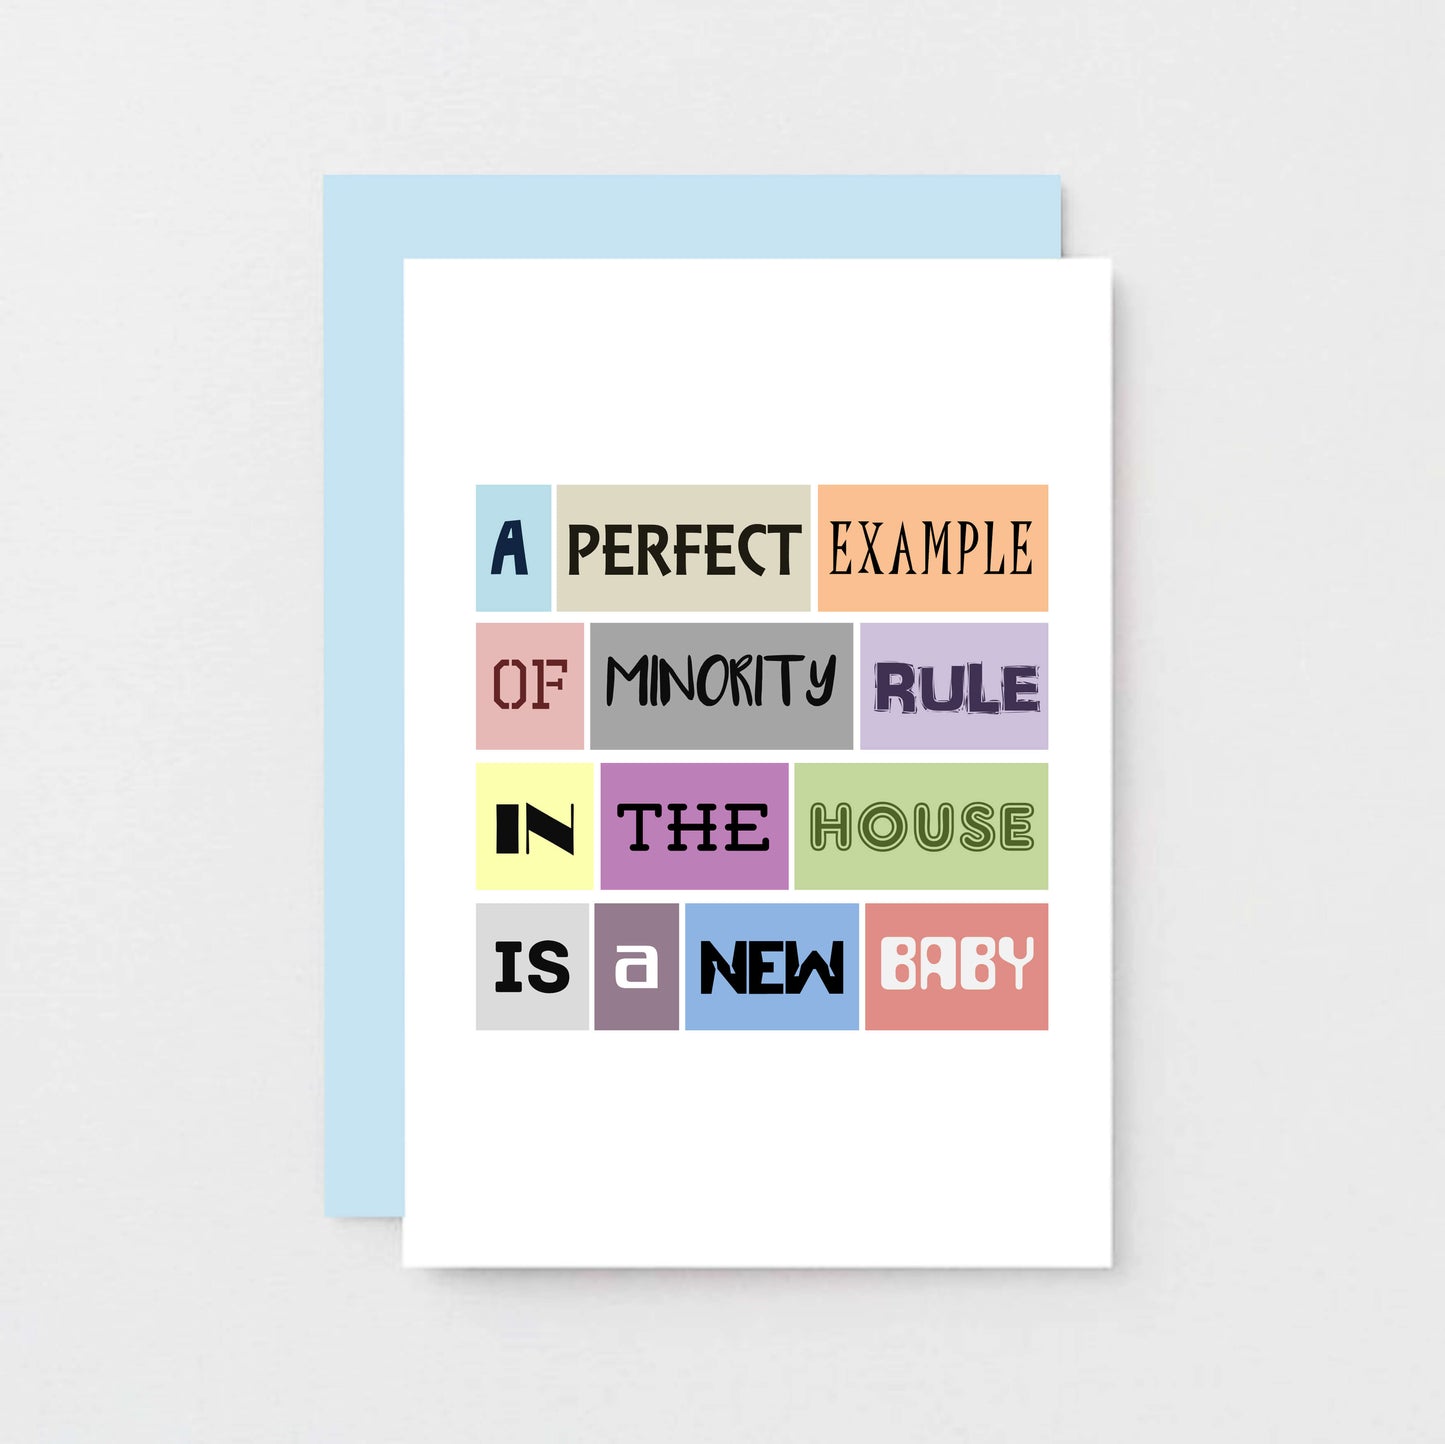 Funny New Baby Card by SixElevenCreations. Reads A perfect example of minority rule in the house is a new baby. Product Code SE0029A6